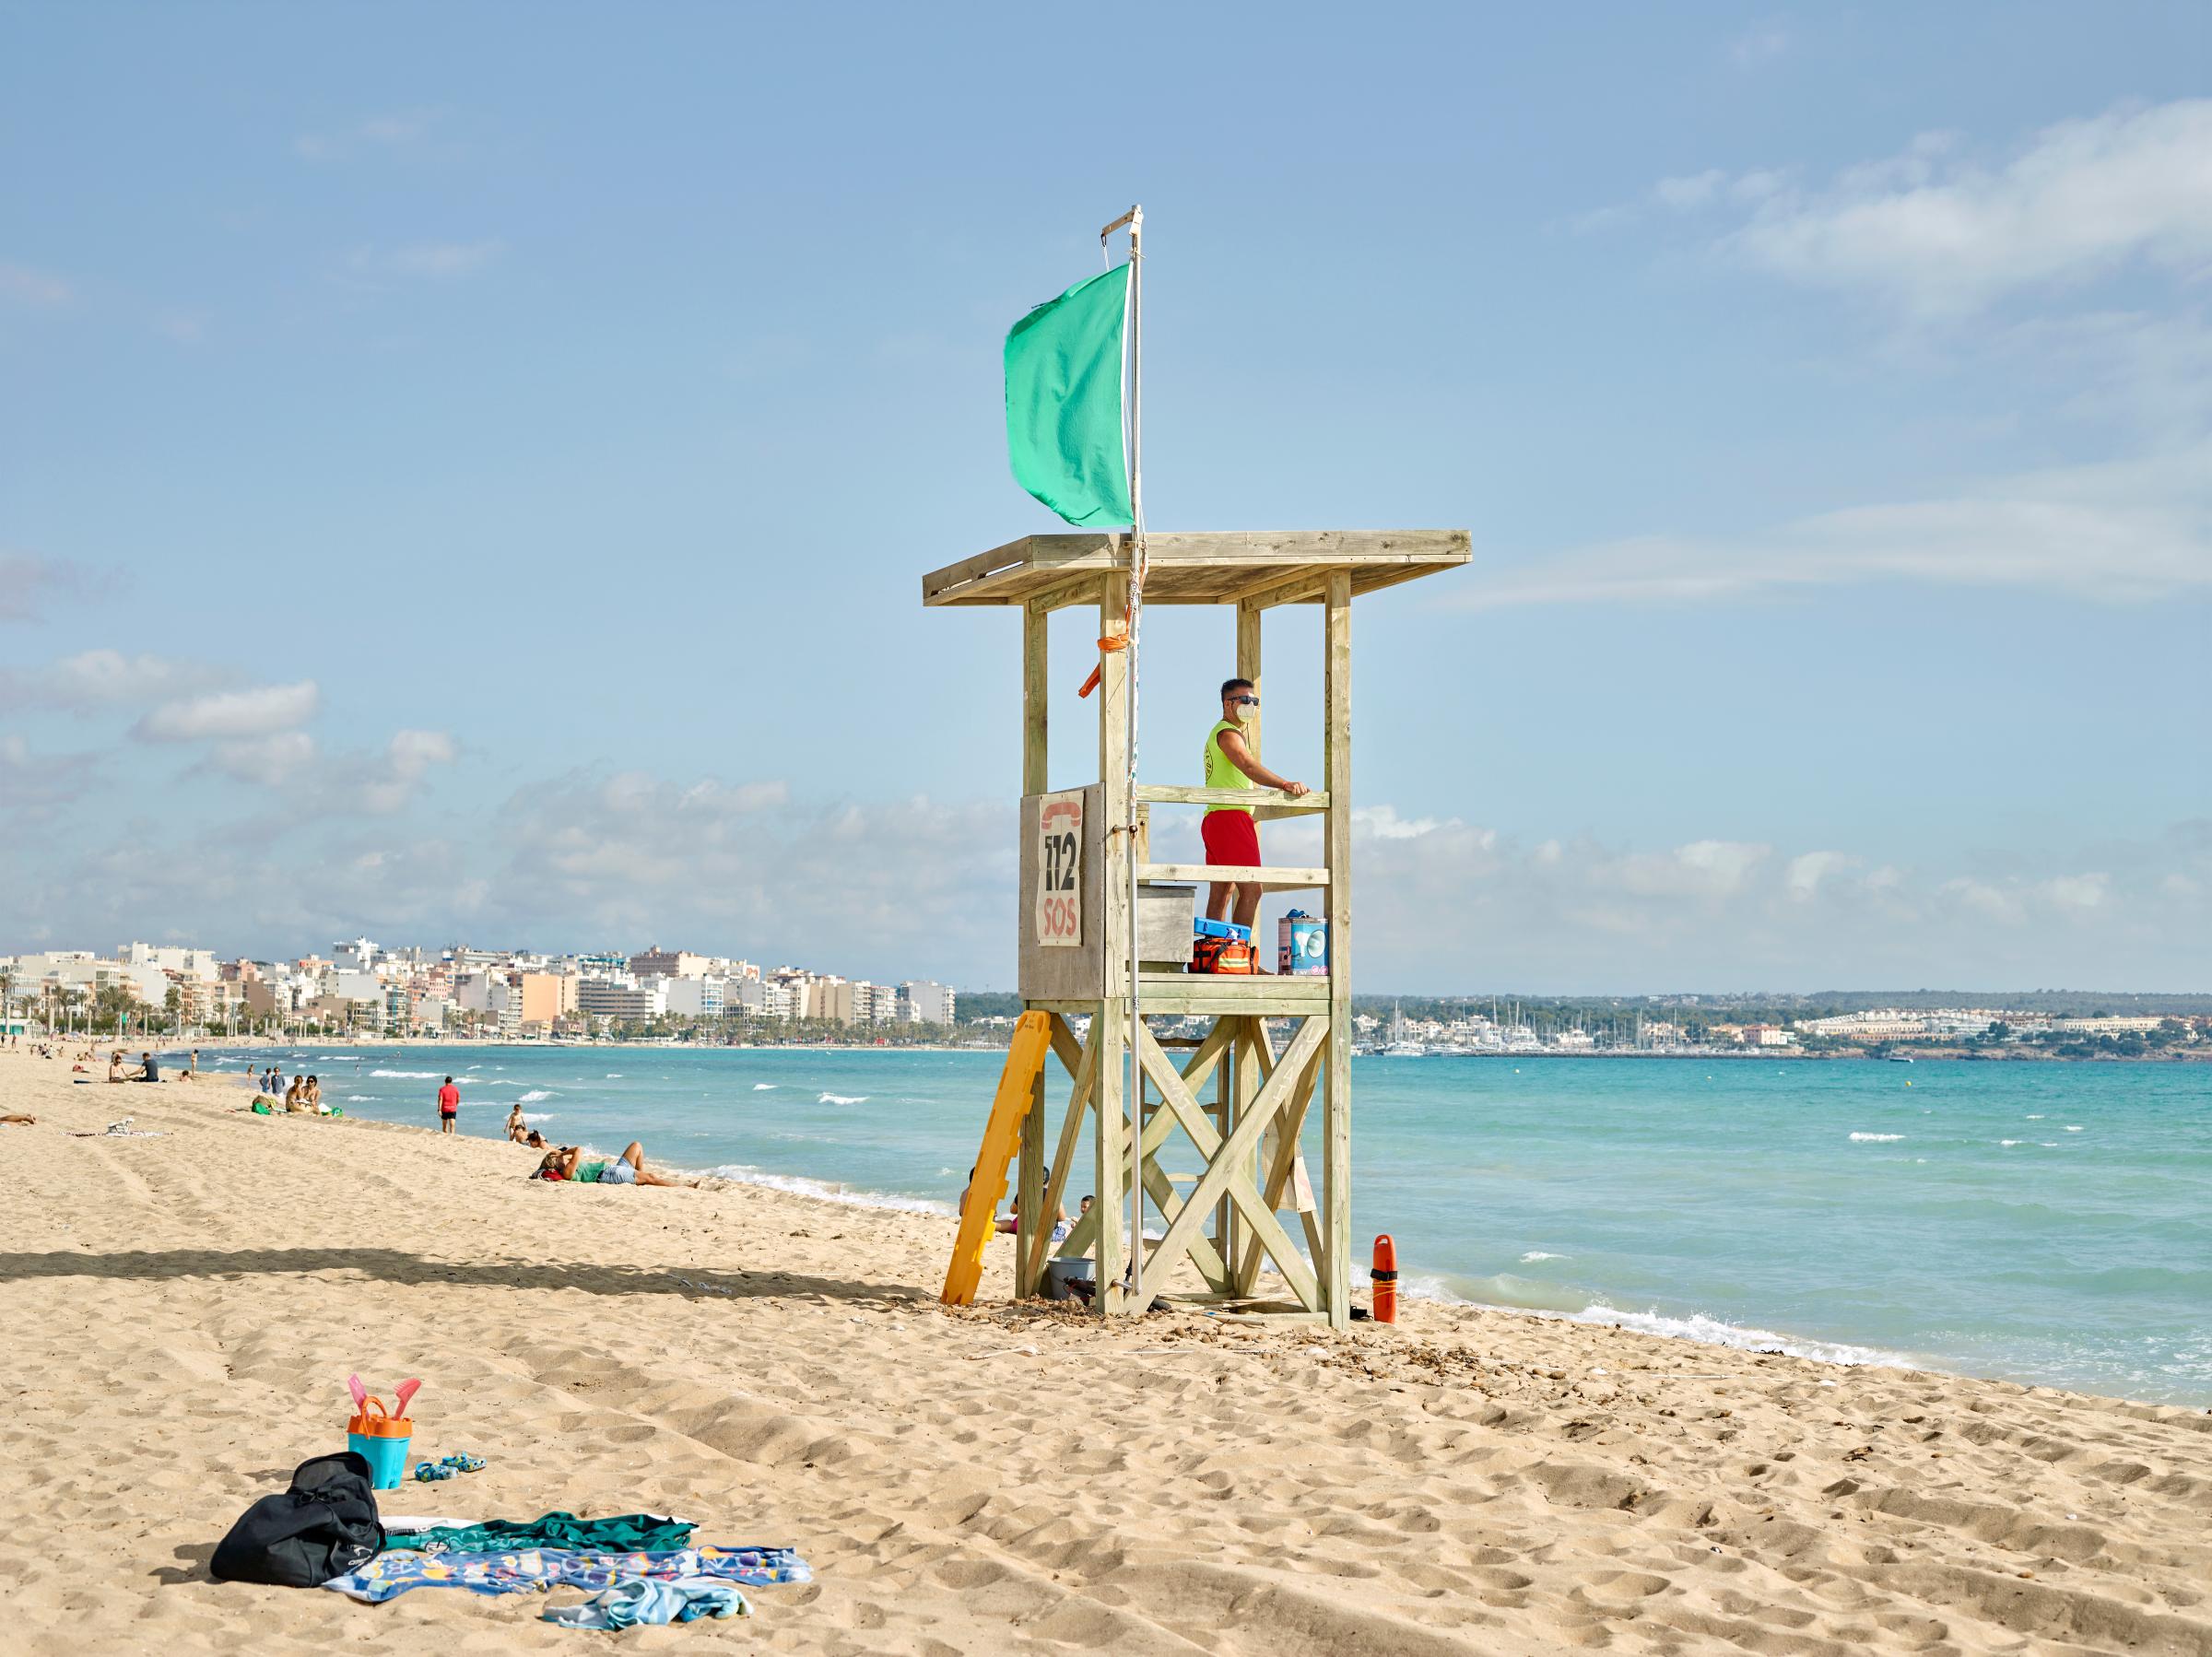 Mallorca , view of the Playa de Palma beach with the lifeguard wearing the mask for safety reasons.